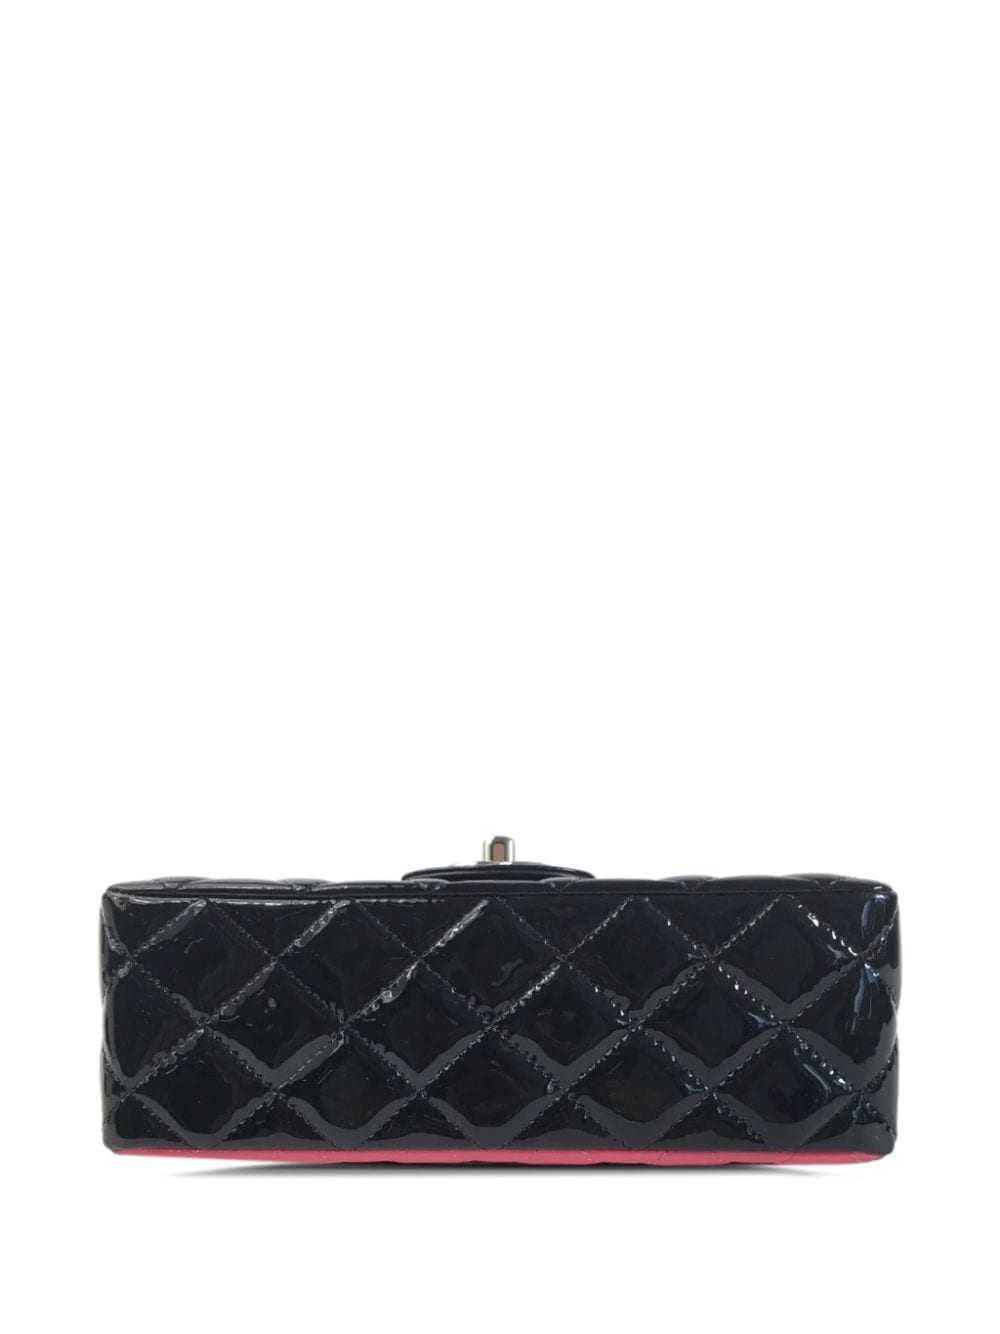 CHANEL Pre-Owned 2019 mini Bicolor Classic Flap s… - image 5